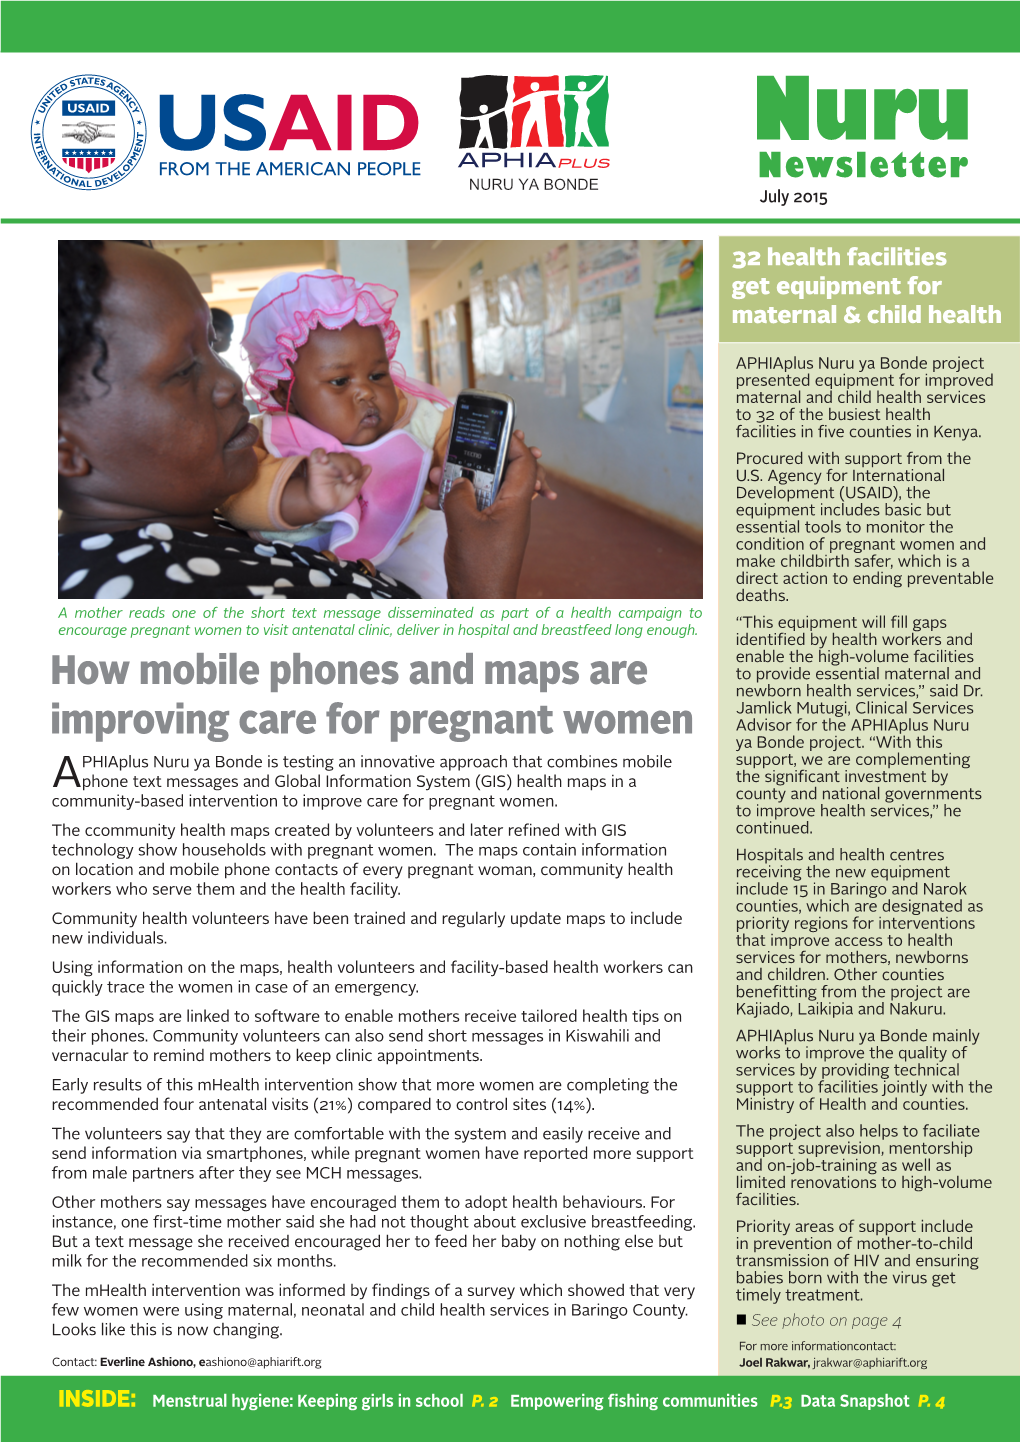 How Mobile Phones and Maps Are Improving Care for Pregnant Women